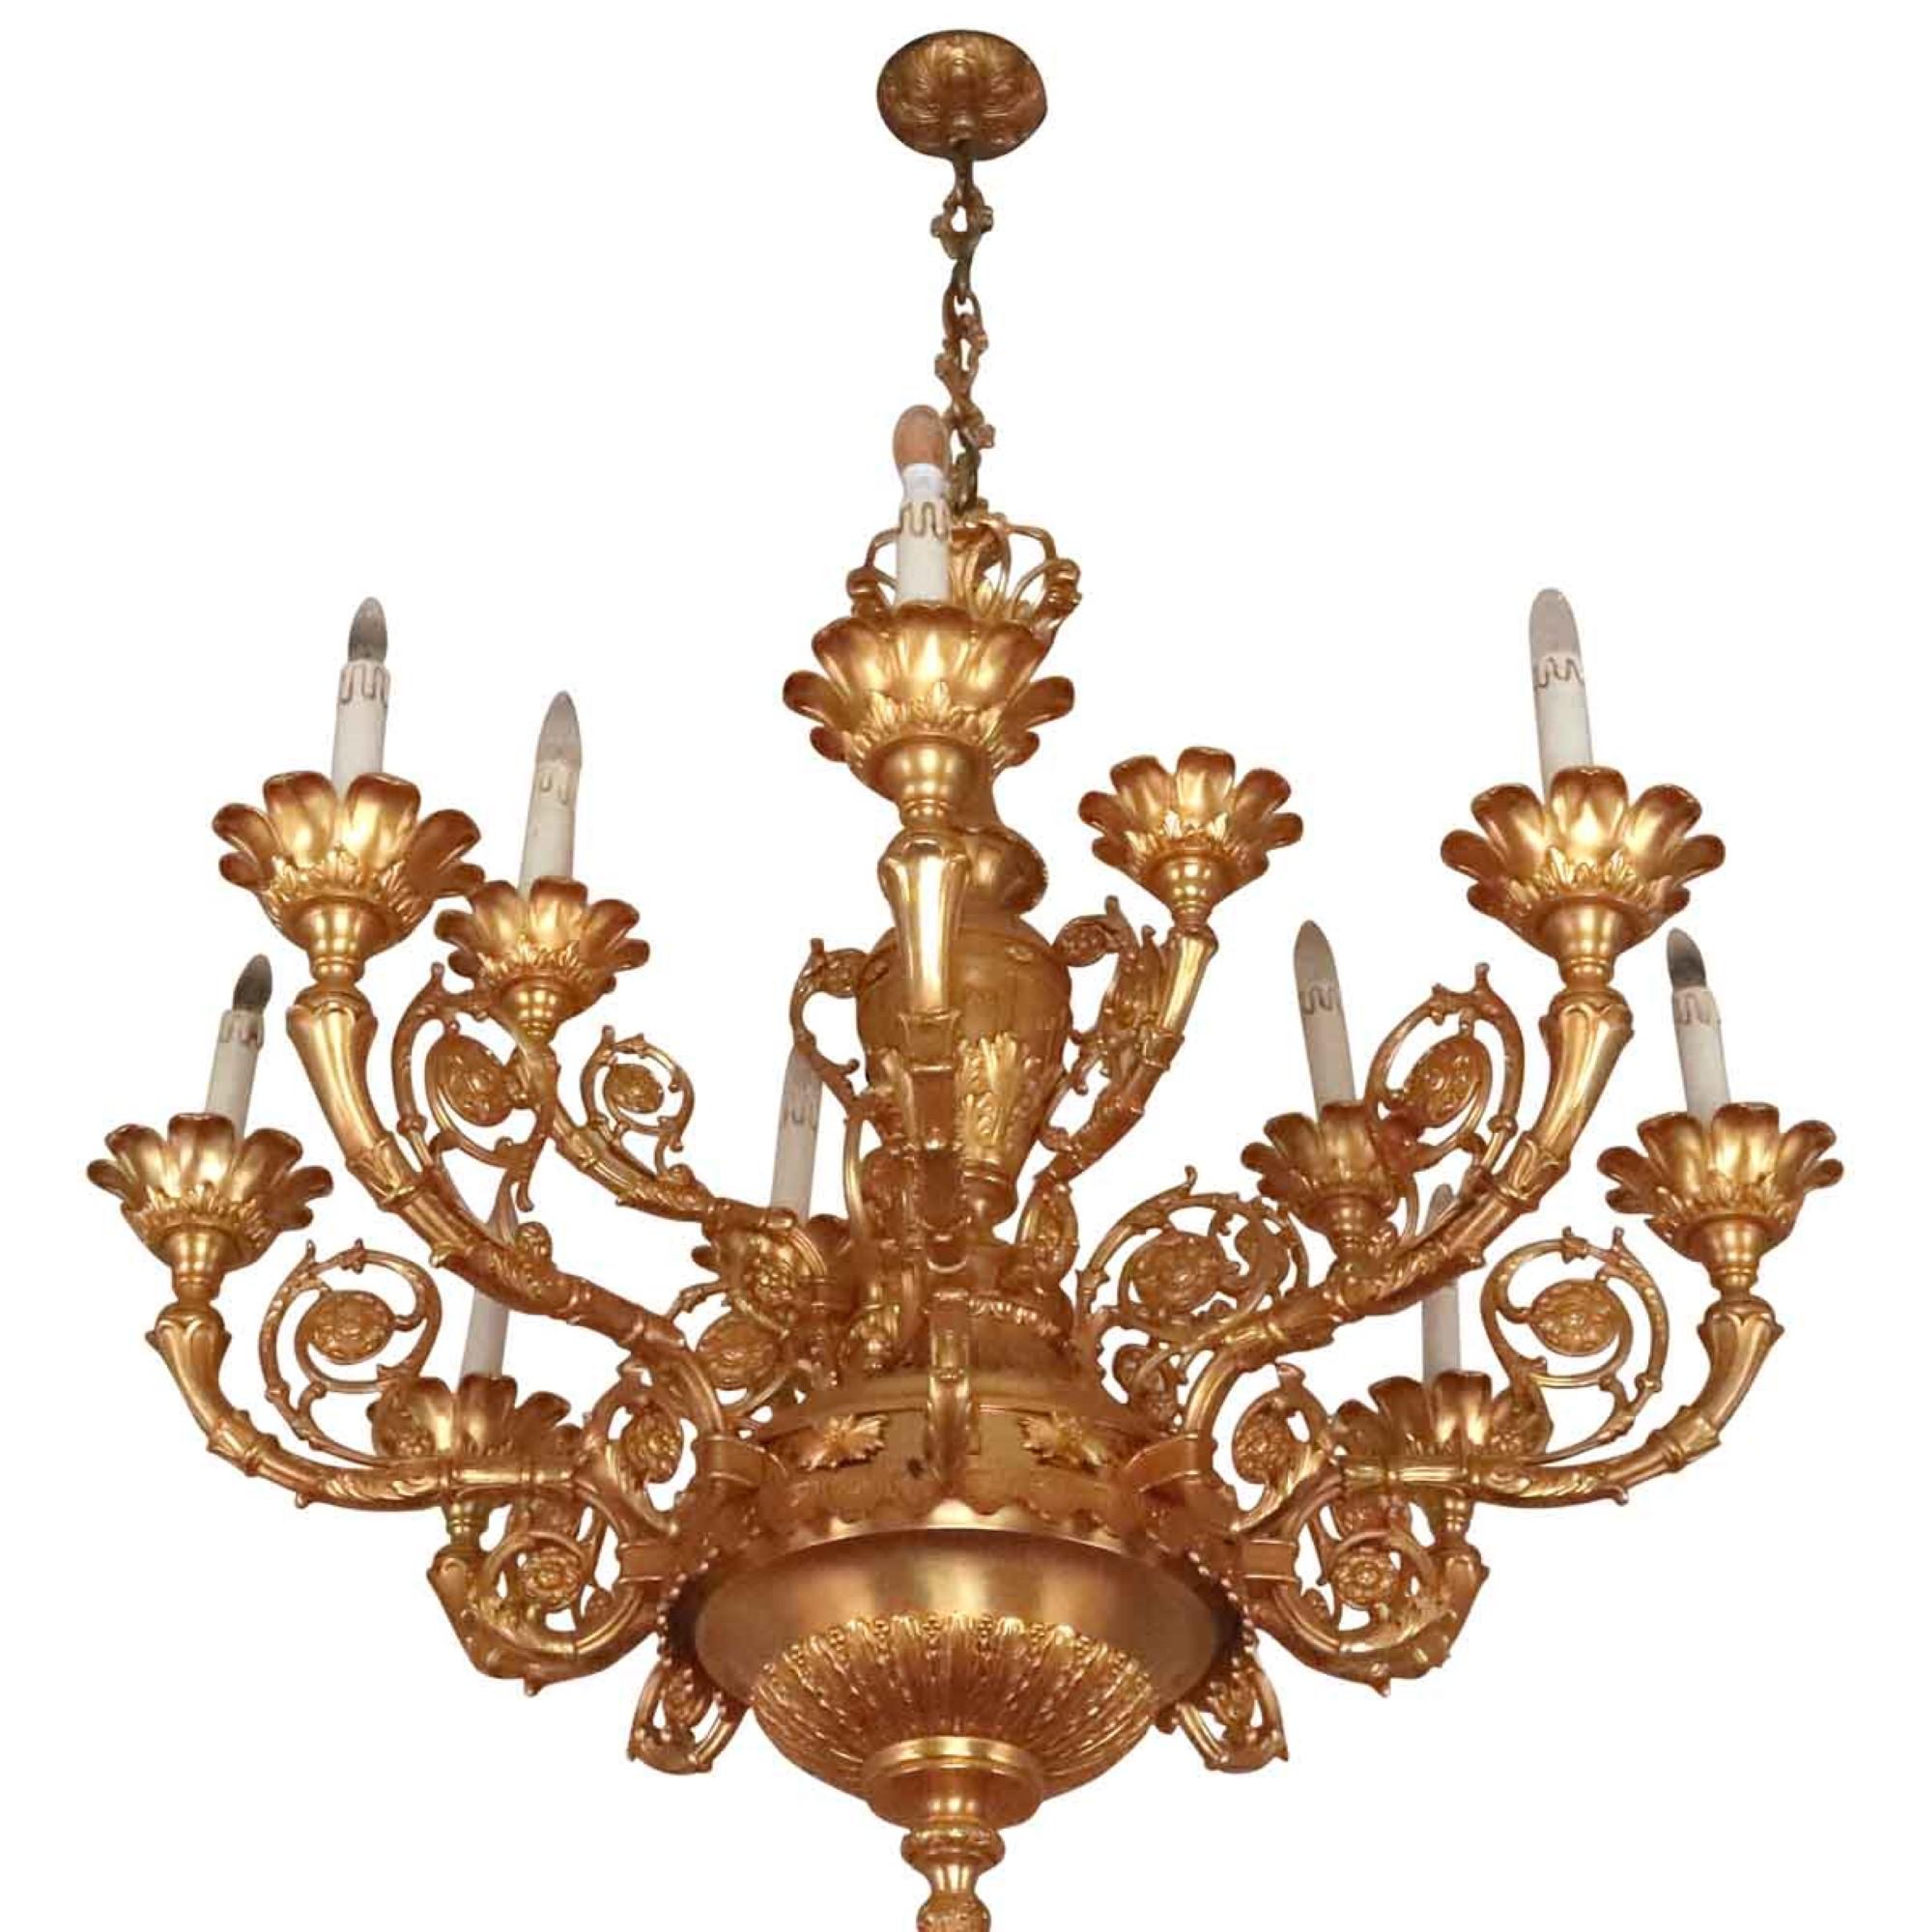 12-arm French chandelier with highly ornate detail with gold gilt over bronze in the Louis XVI style. Elegant scroll and leafy floral detail decorates the bronze arms. This is from The Holland Room of the Waldorf Astoria Hotel. Price includes